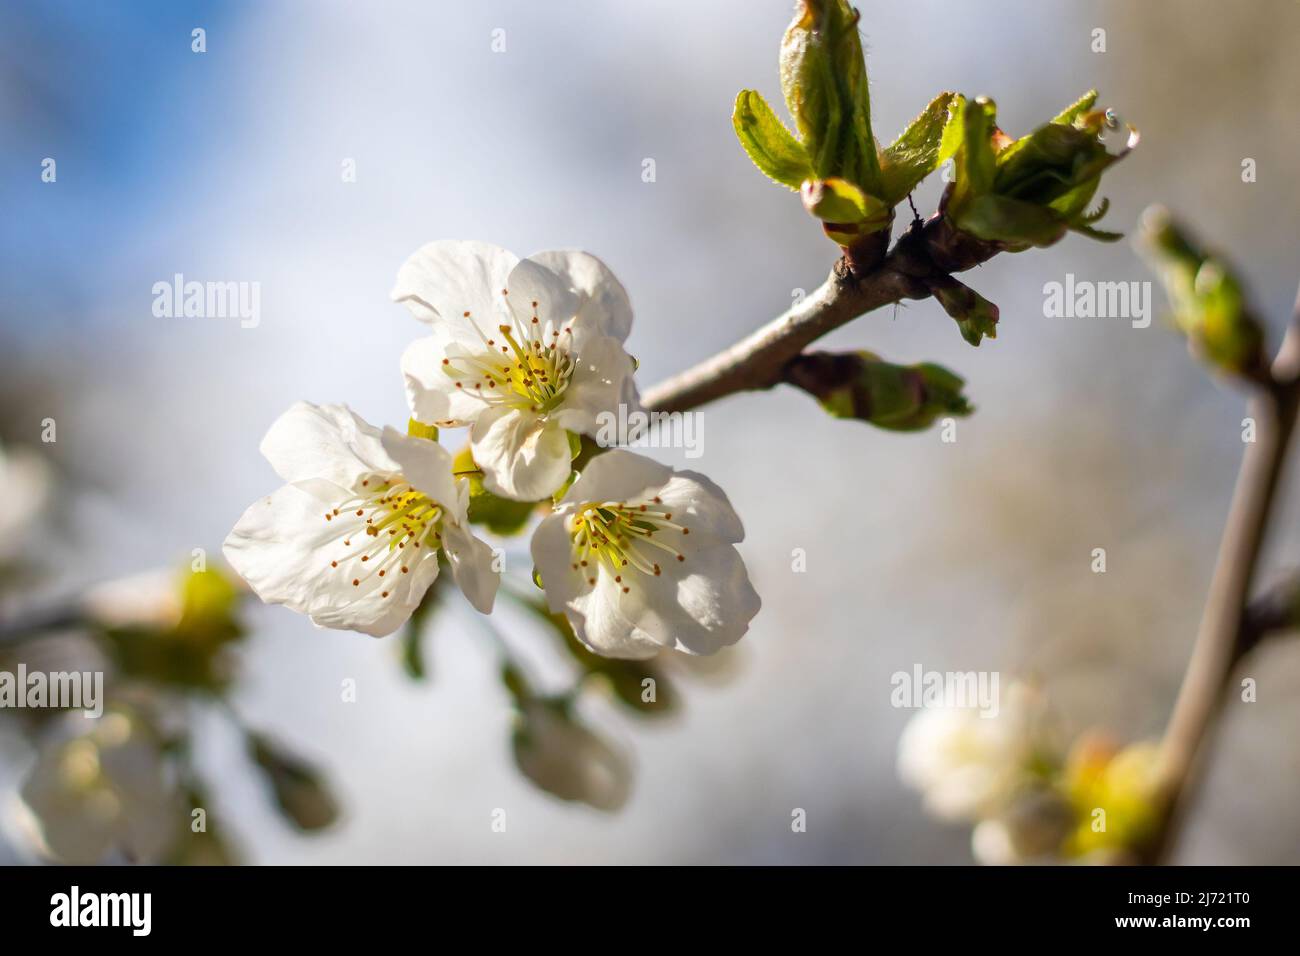 cherry blossoms in bloom on a branch, sunny spring day with blue sky, close-up view Stock Photo